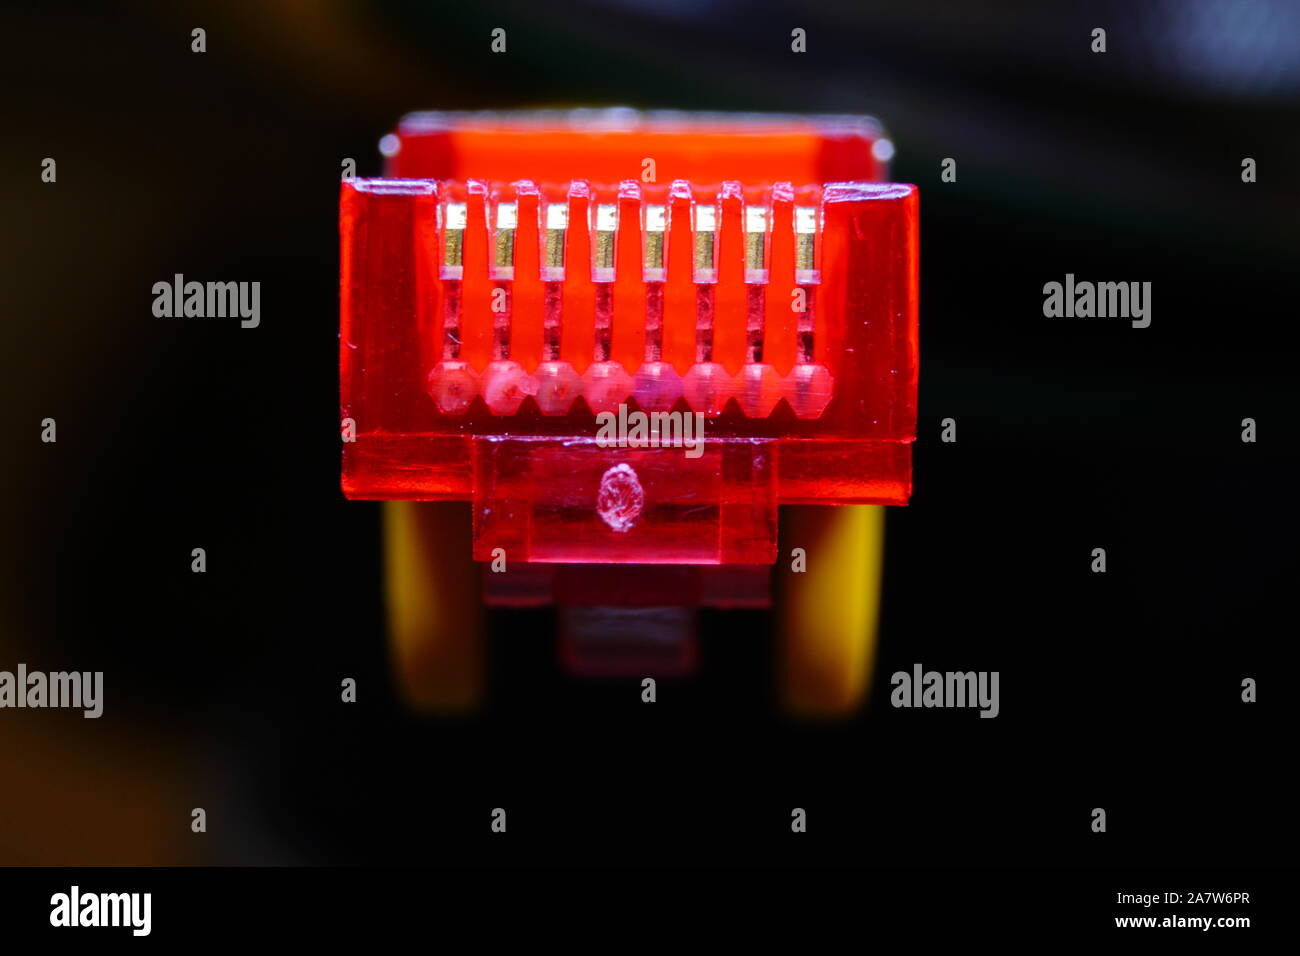 Macro cross section front view of yellow RJ45 CAT6 shielded network data internet cable red connector on dark background Stock Photo